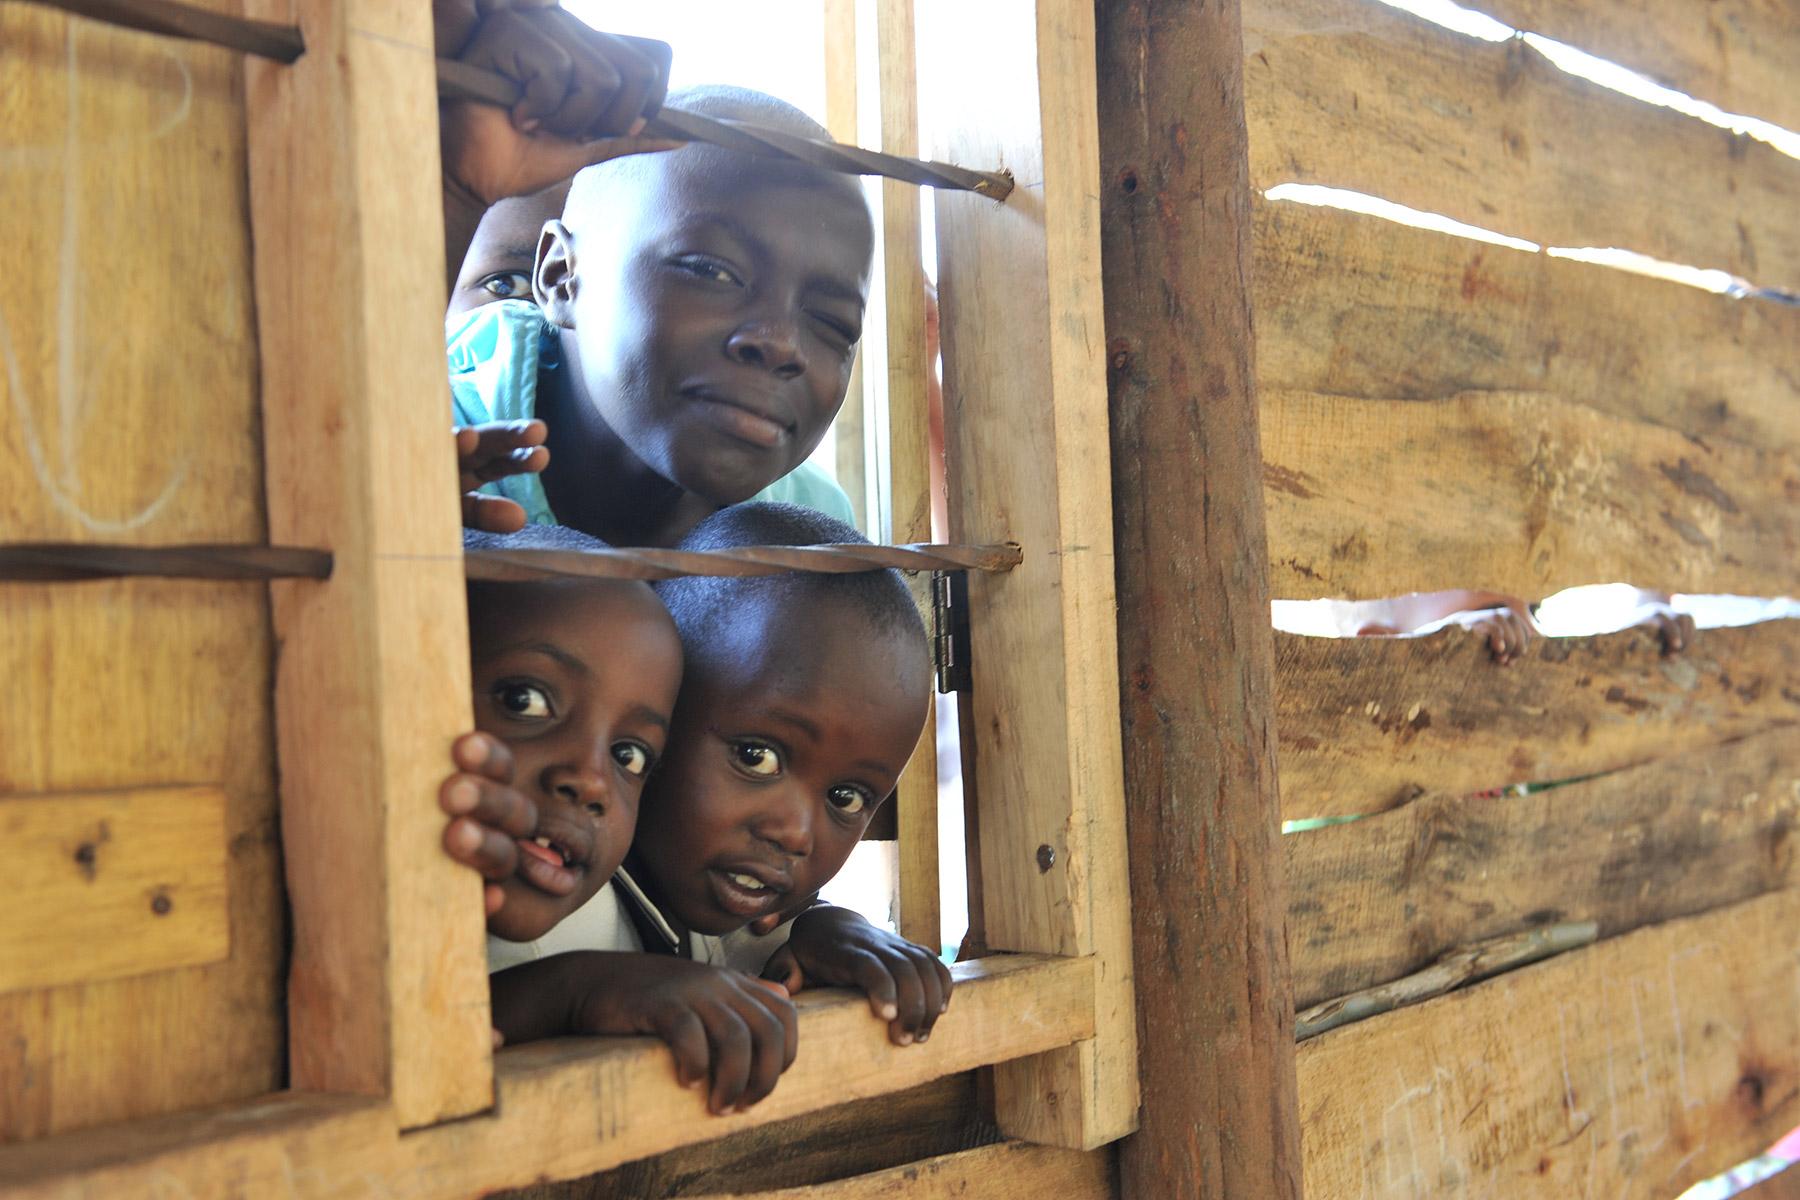 Children looking by a window at the Katalyeba Early Learning Center, in Rwamwanja, Uganda. The center welcomes children from both the host community and the refugee settlement. Photo credit: LWF/M. Renaux